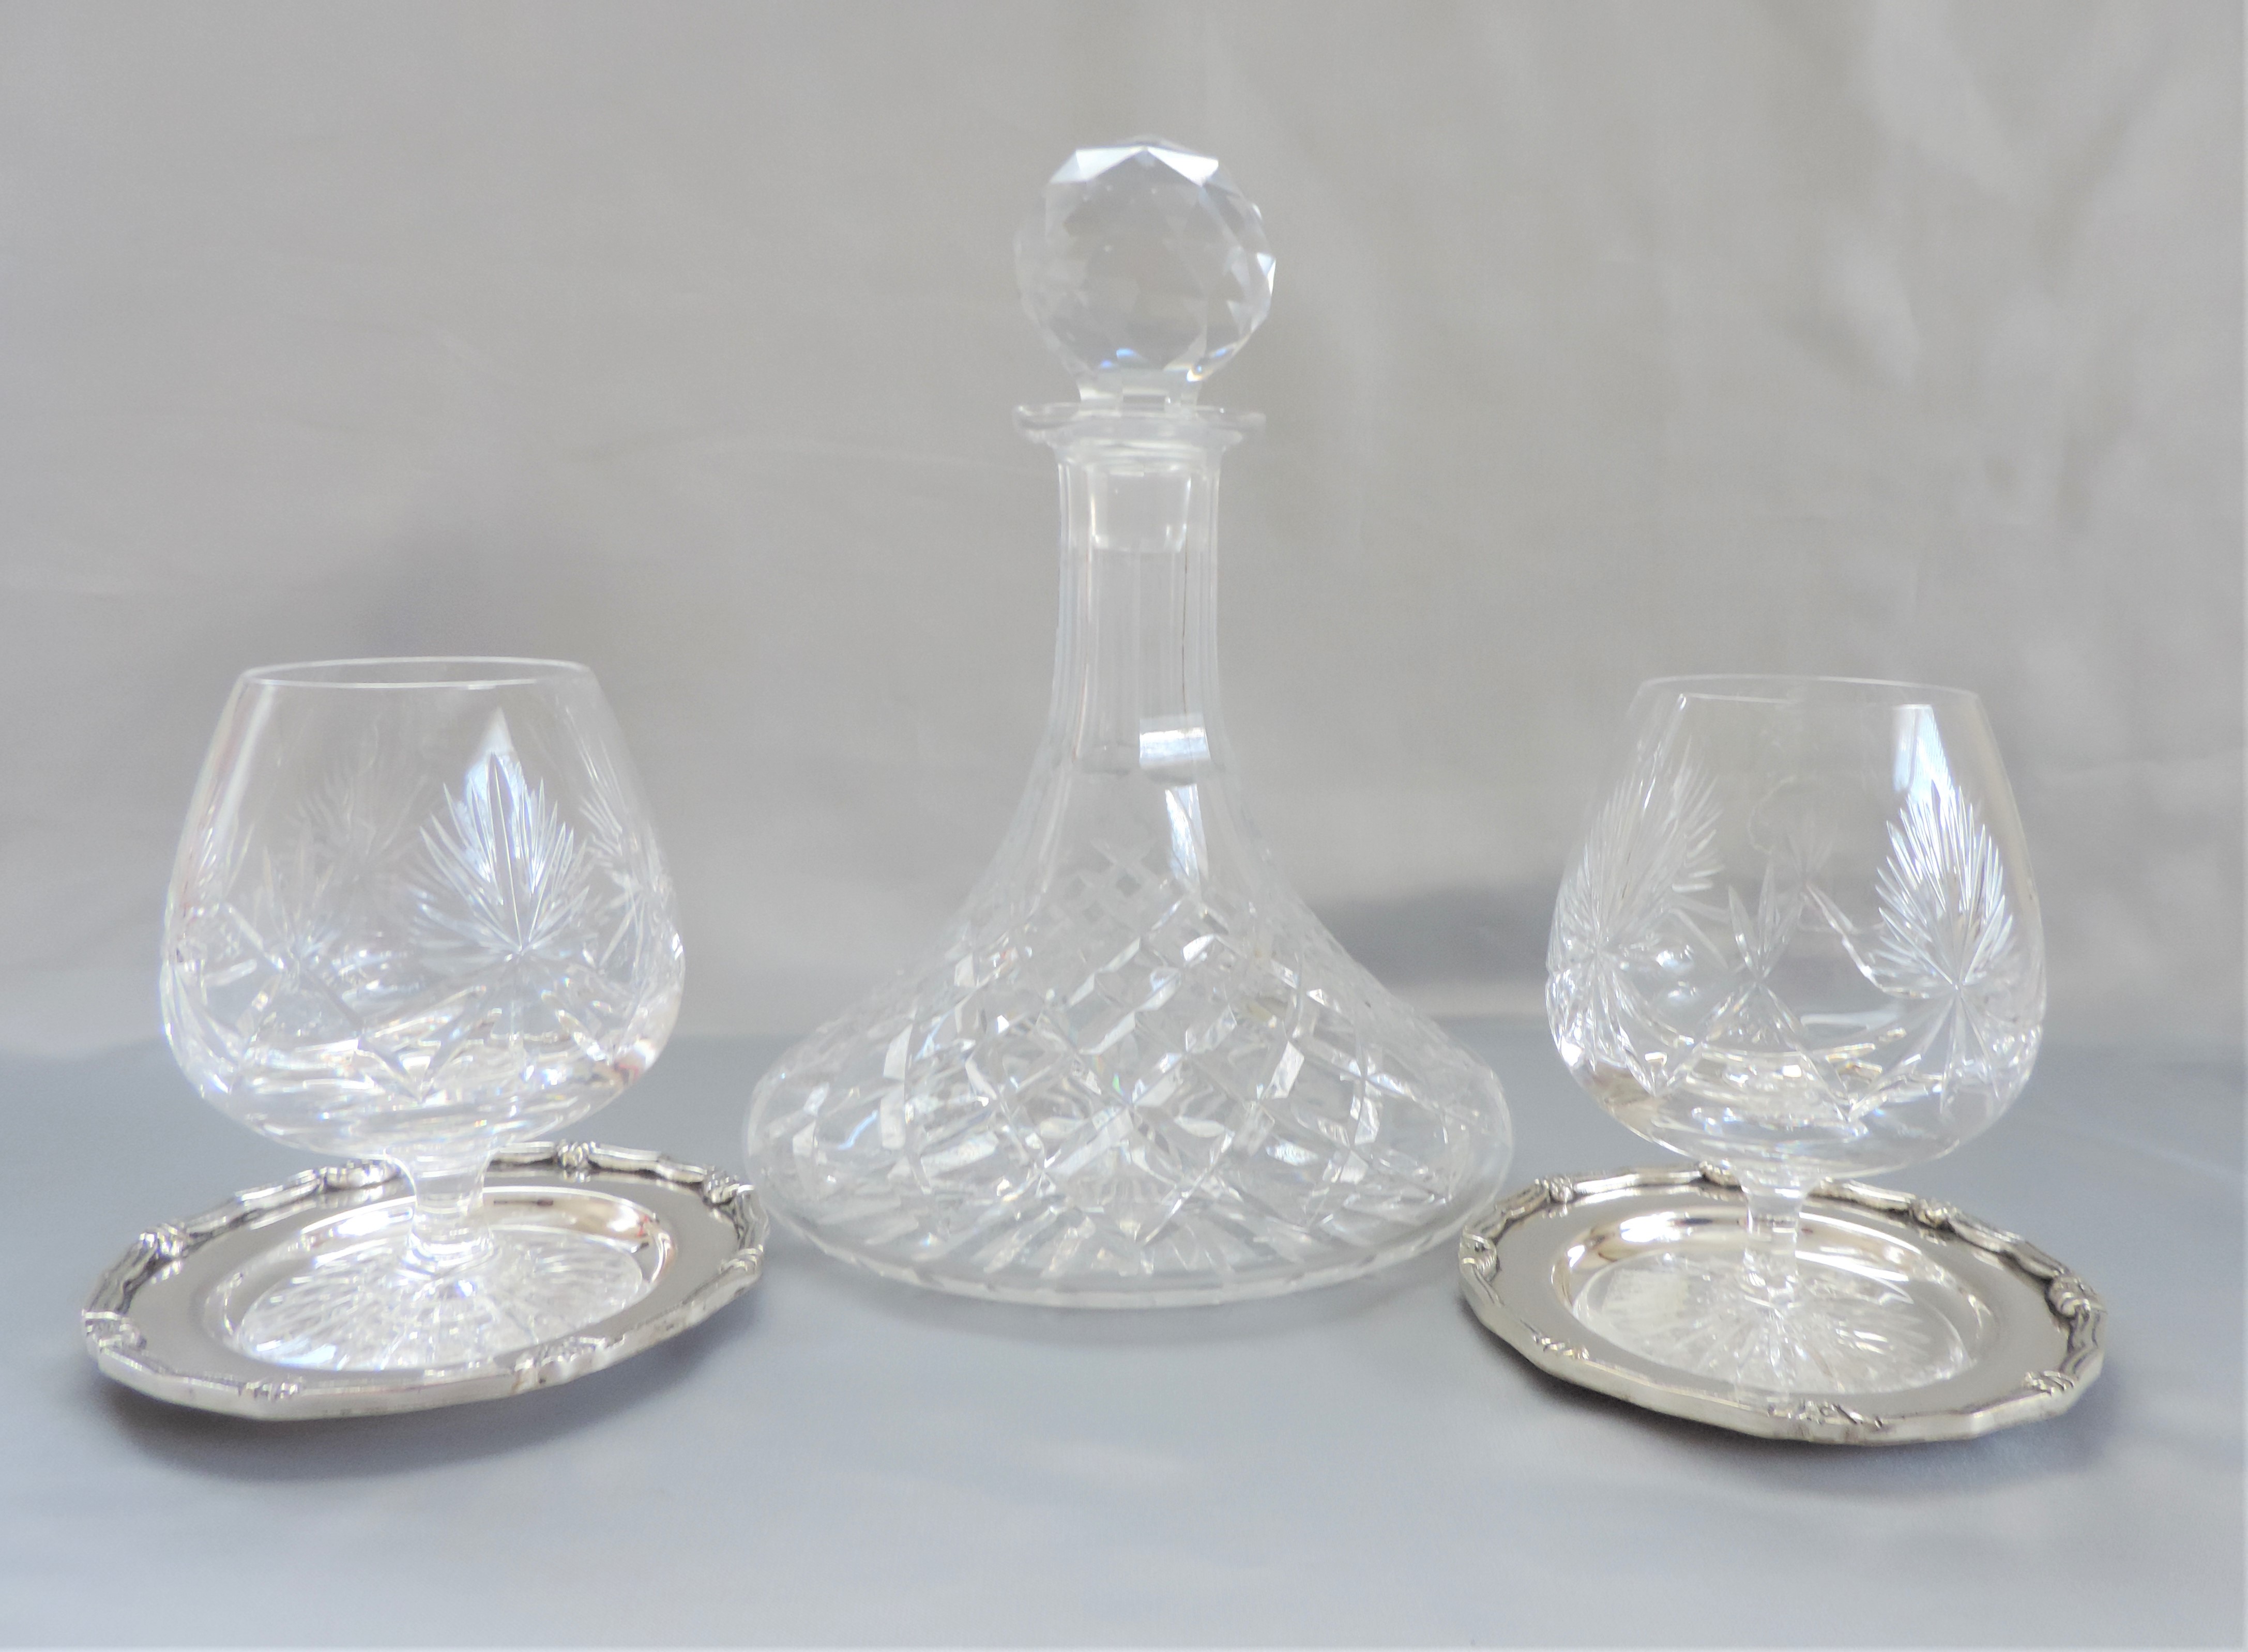 Crystal Brandy Decanter and Glasses